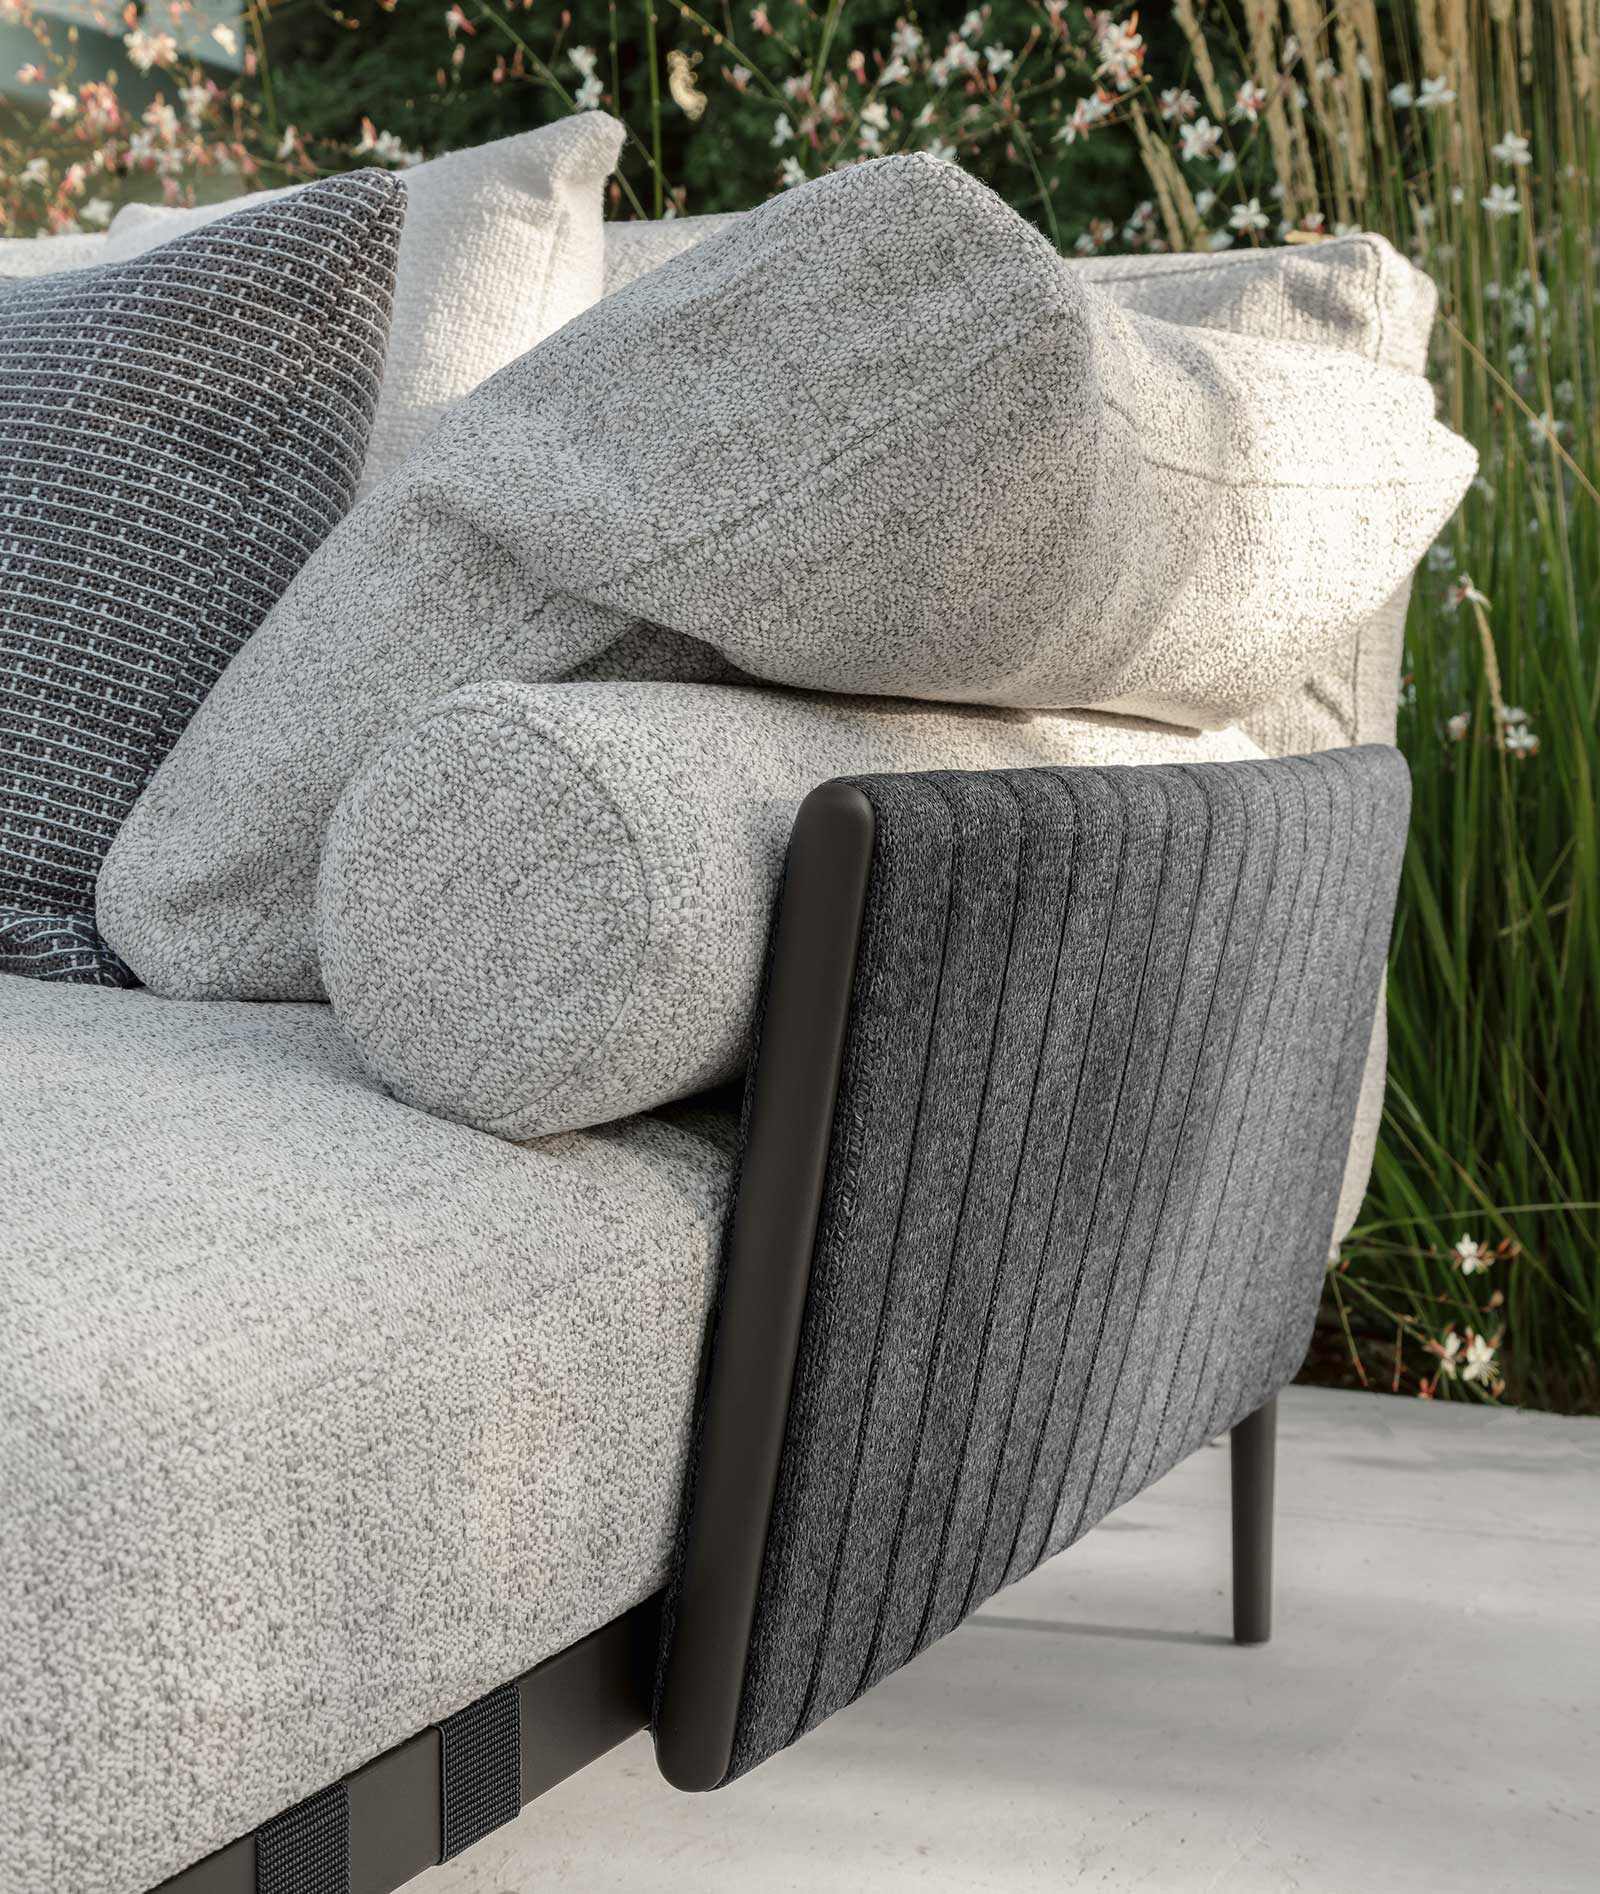 High-quality and elegant outdoor grey and beige sofa. Linear and modular lounge set, fully customizable. Shop online for the best garden furniture.